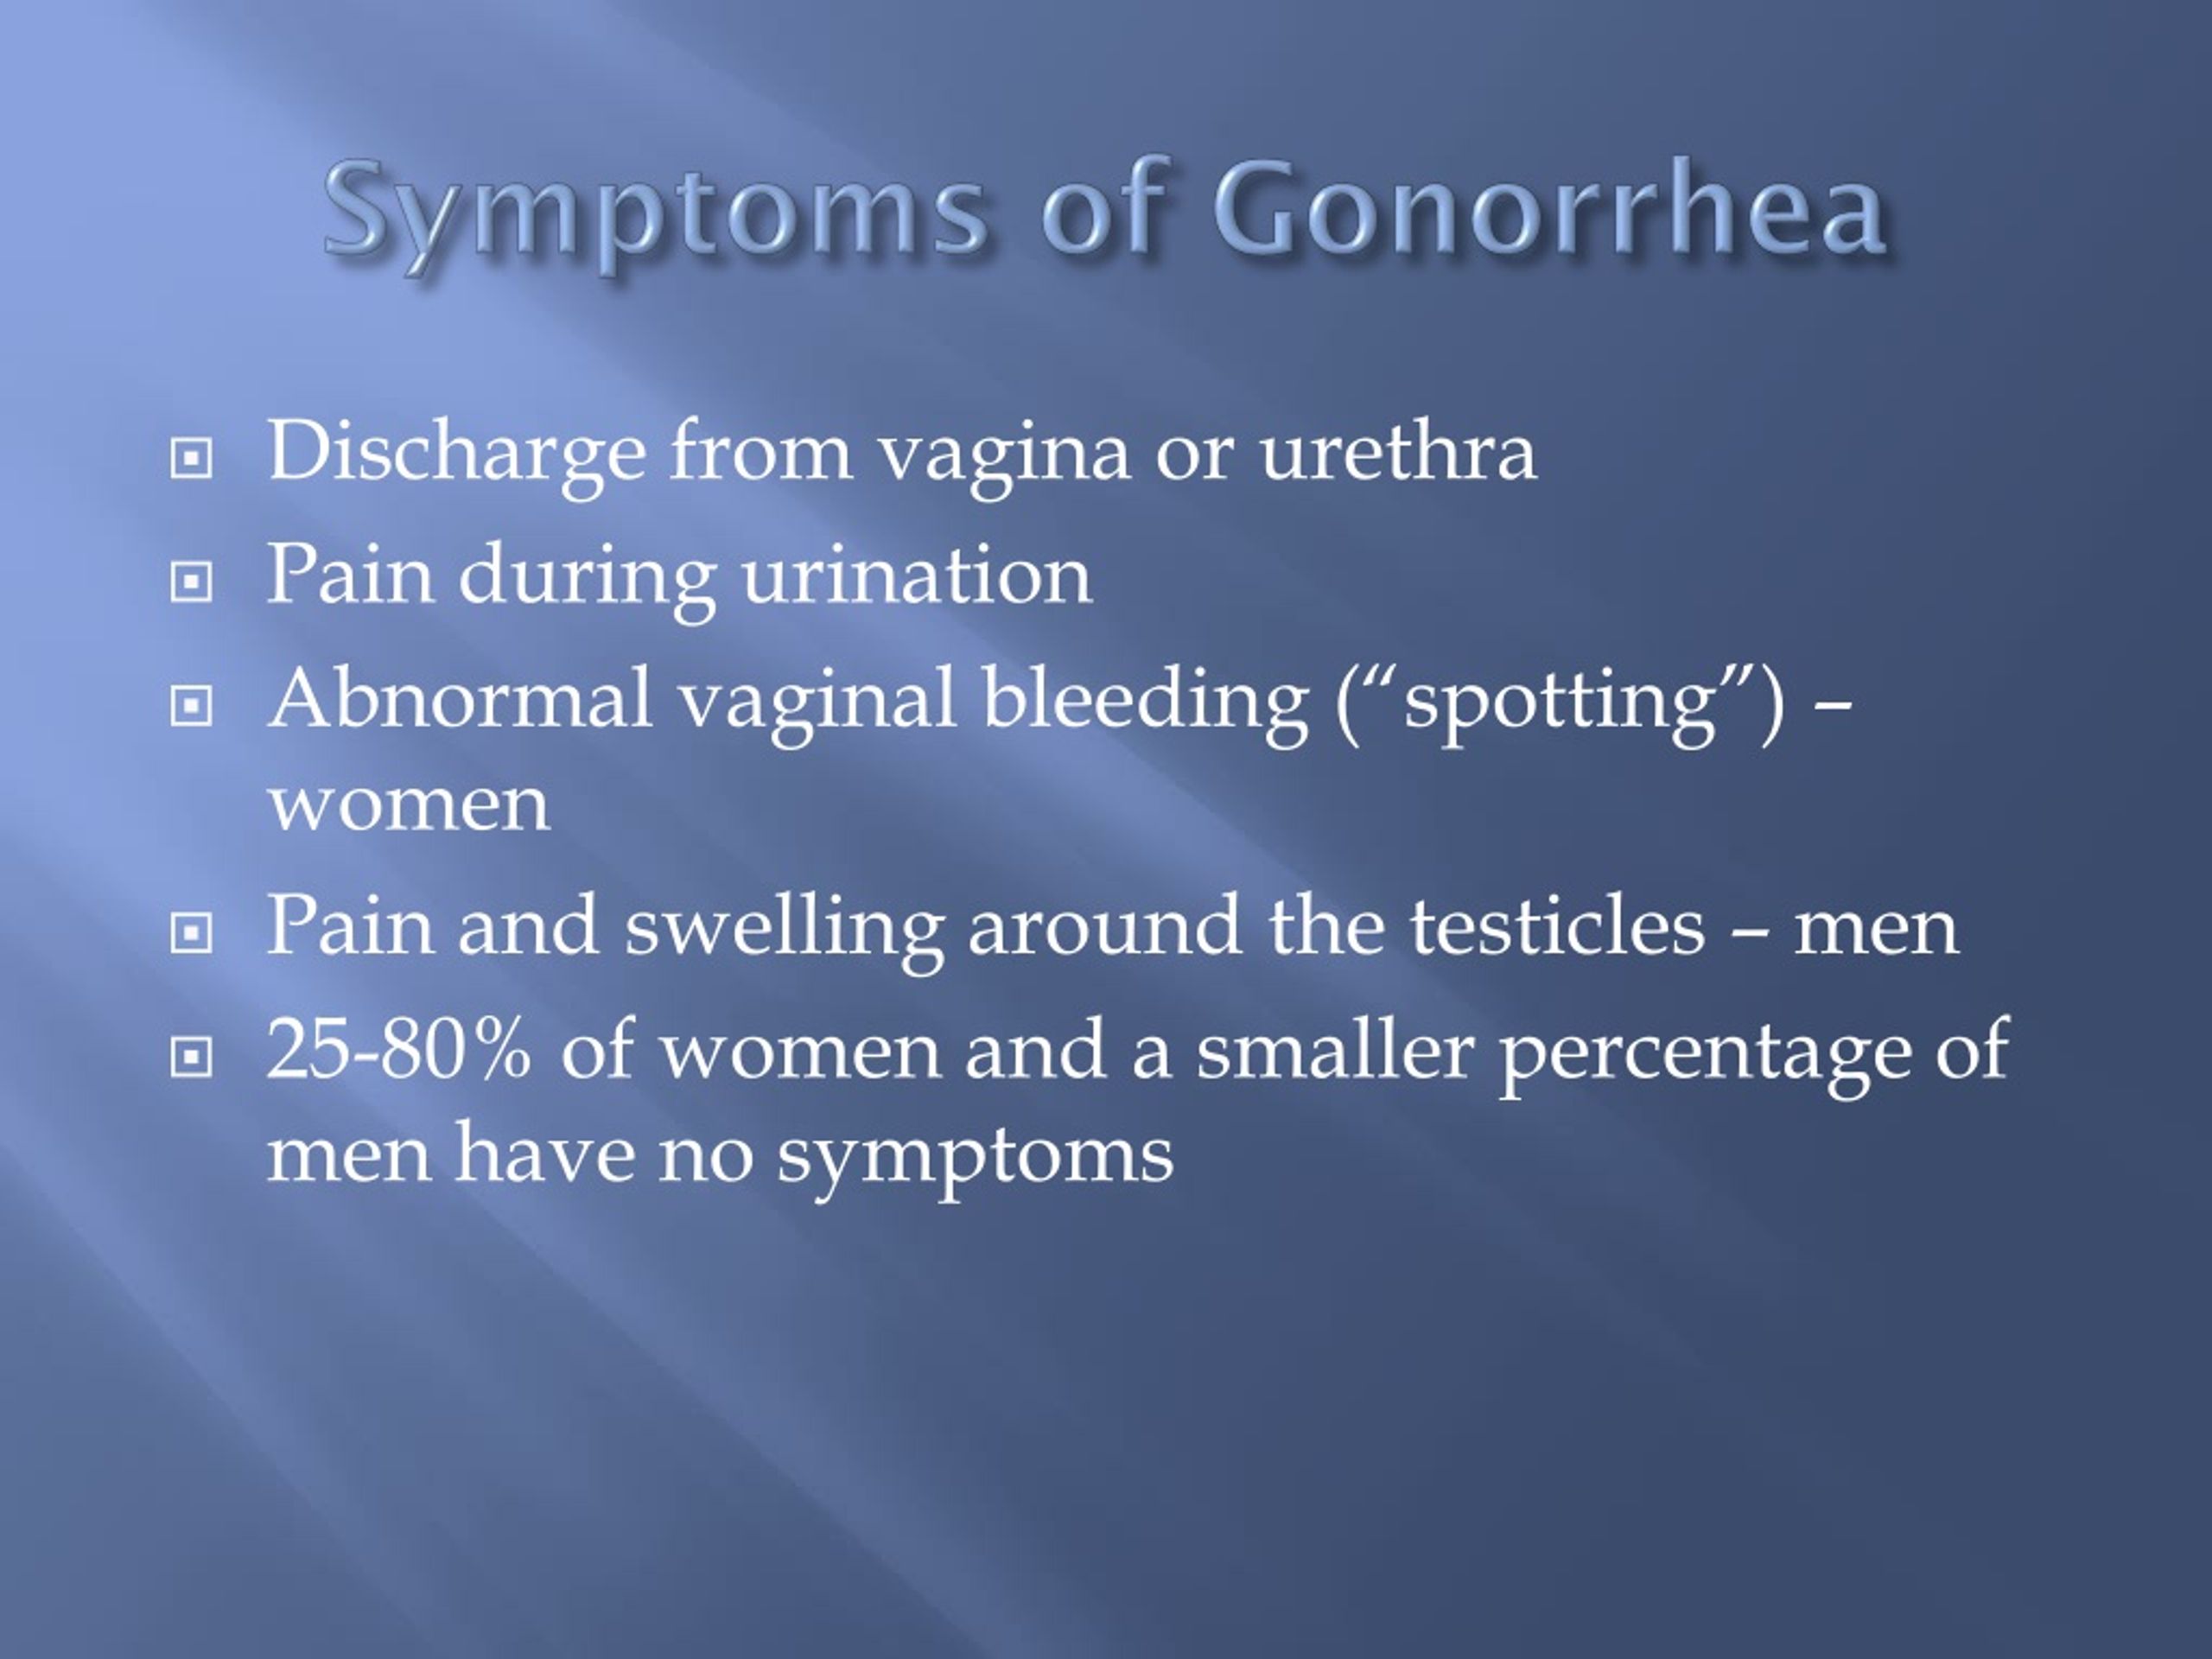 gonorrhea symptoms pictures male